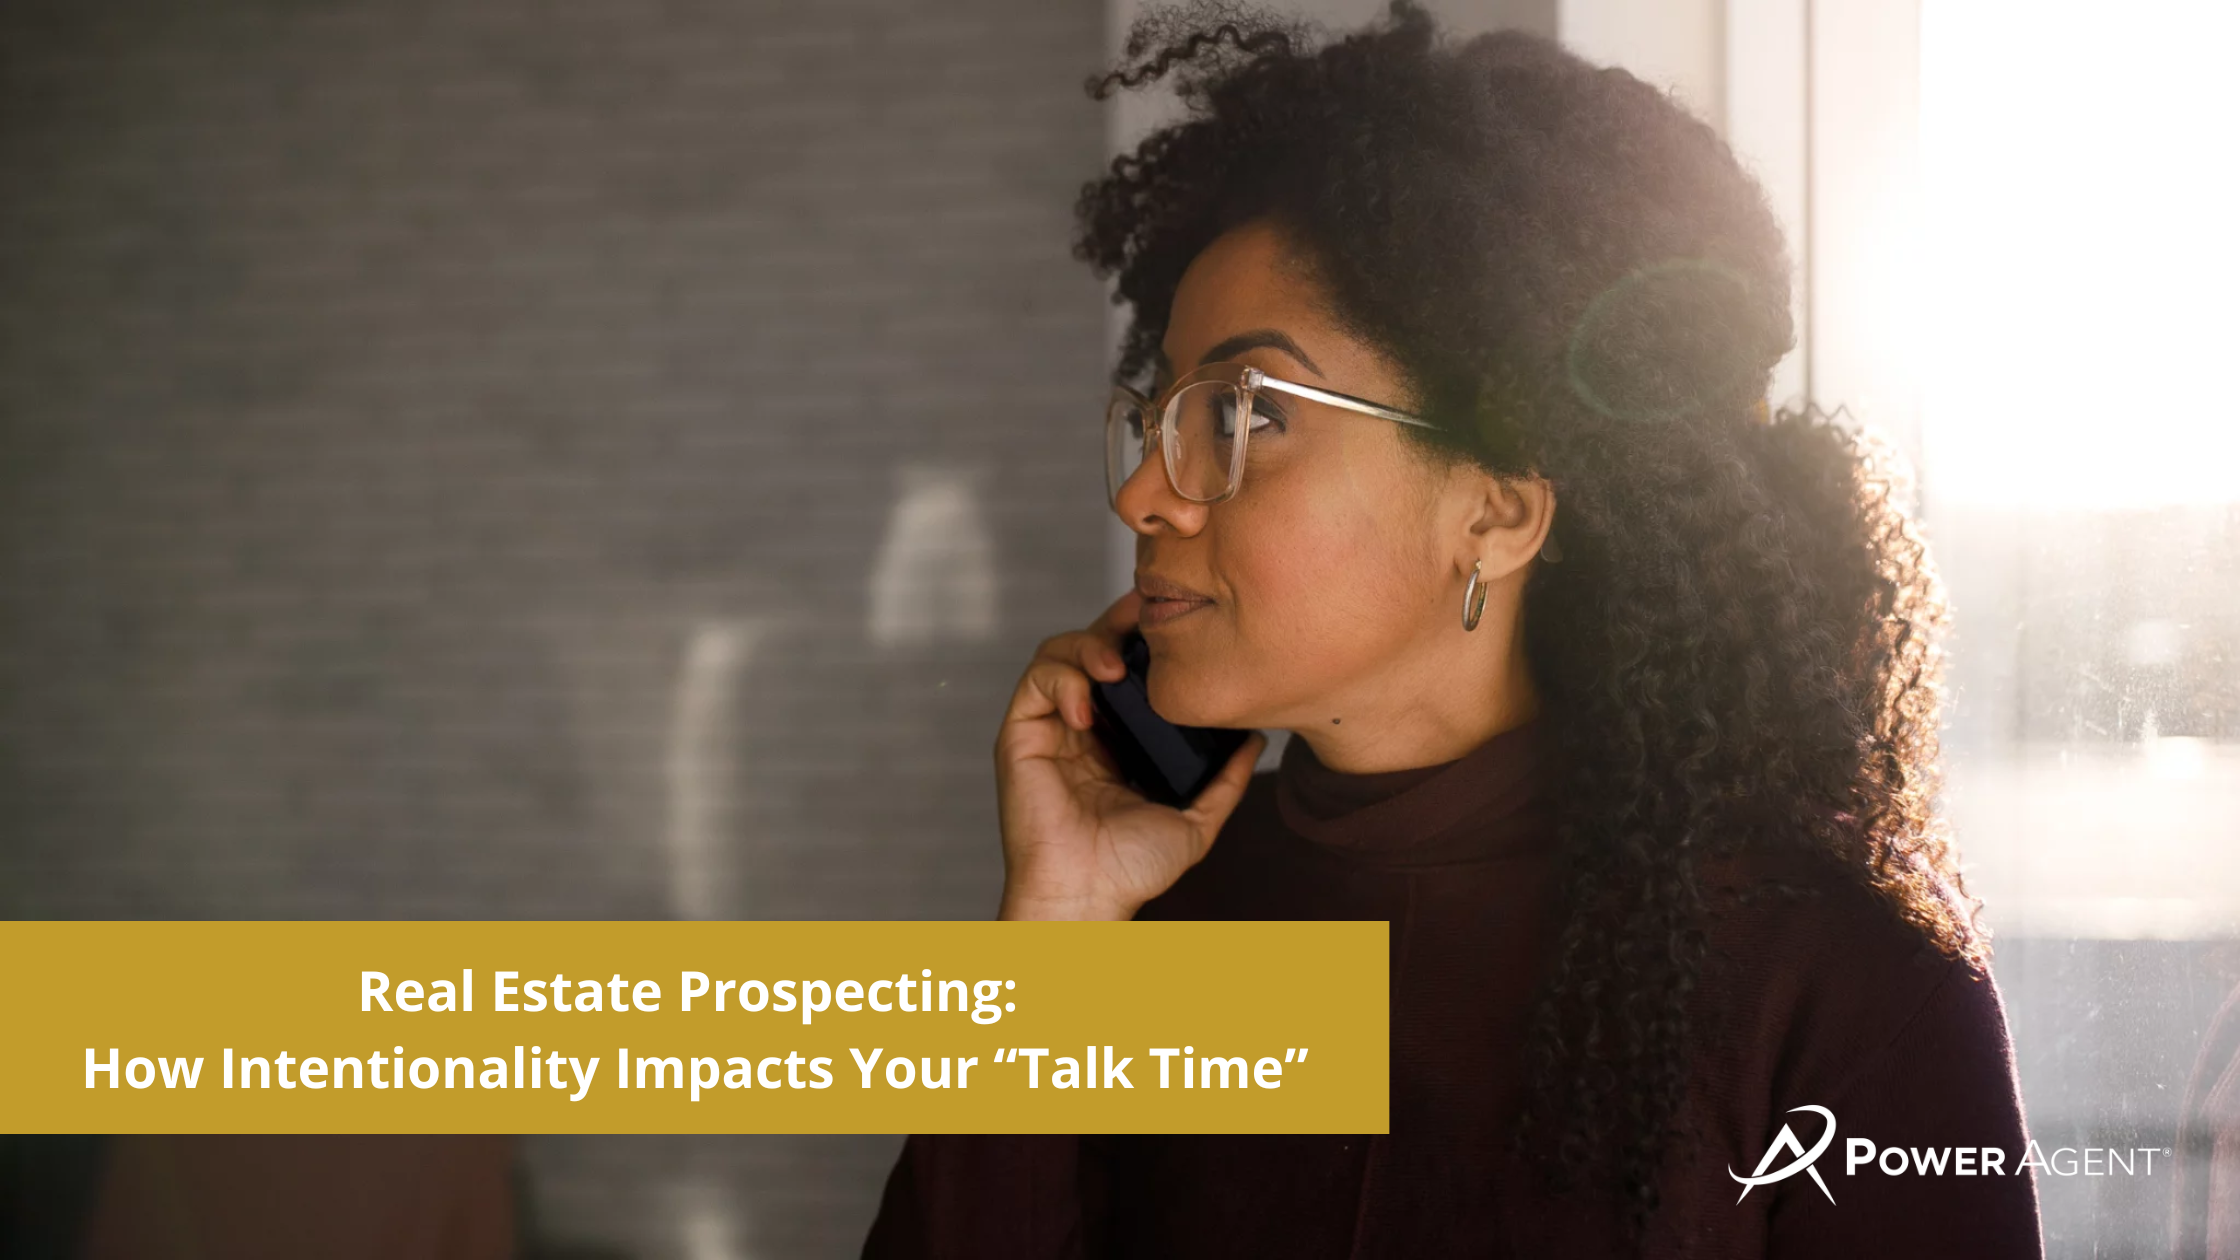 Real Estate Prospecting: How Intentionality Impacts Your “Talk Time”